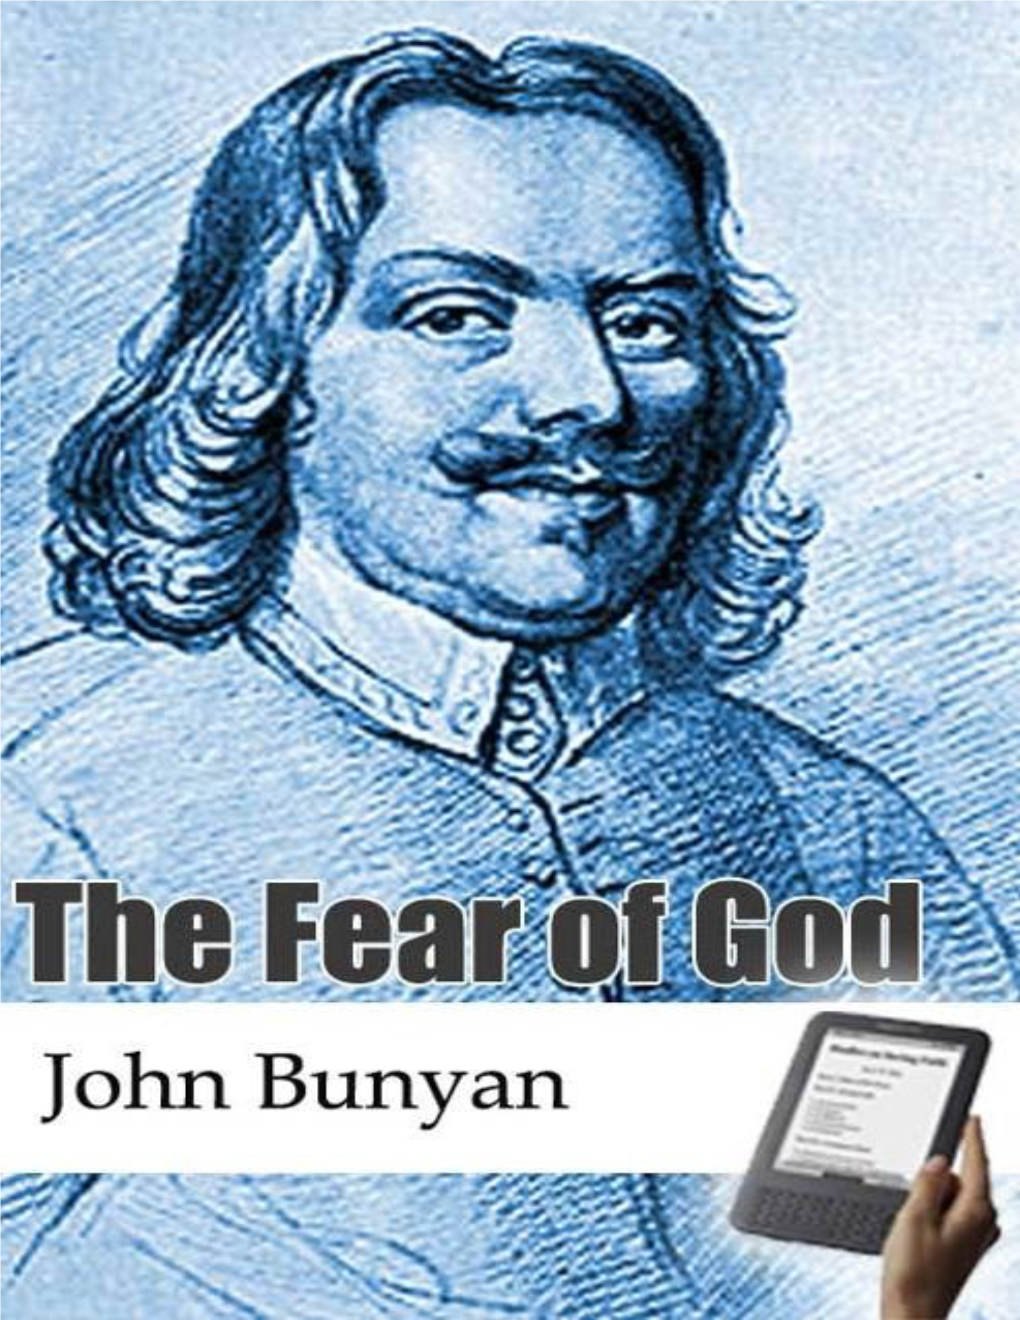 A Treatise on the Fear of God by John Bunyan